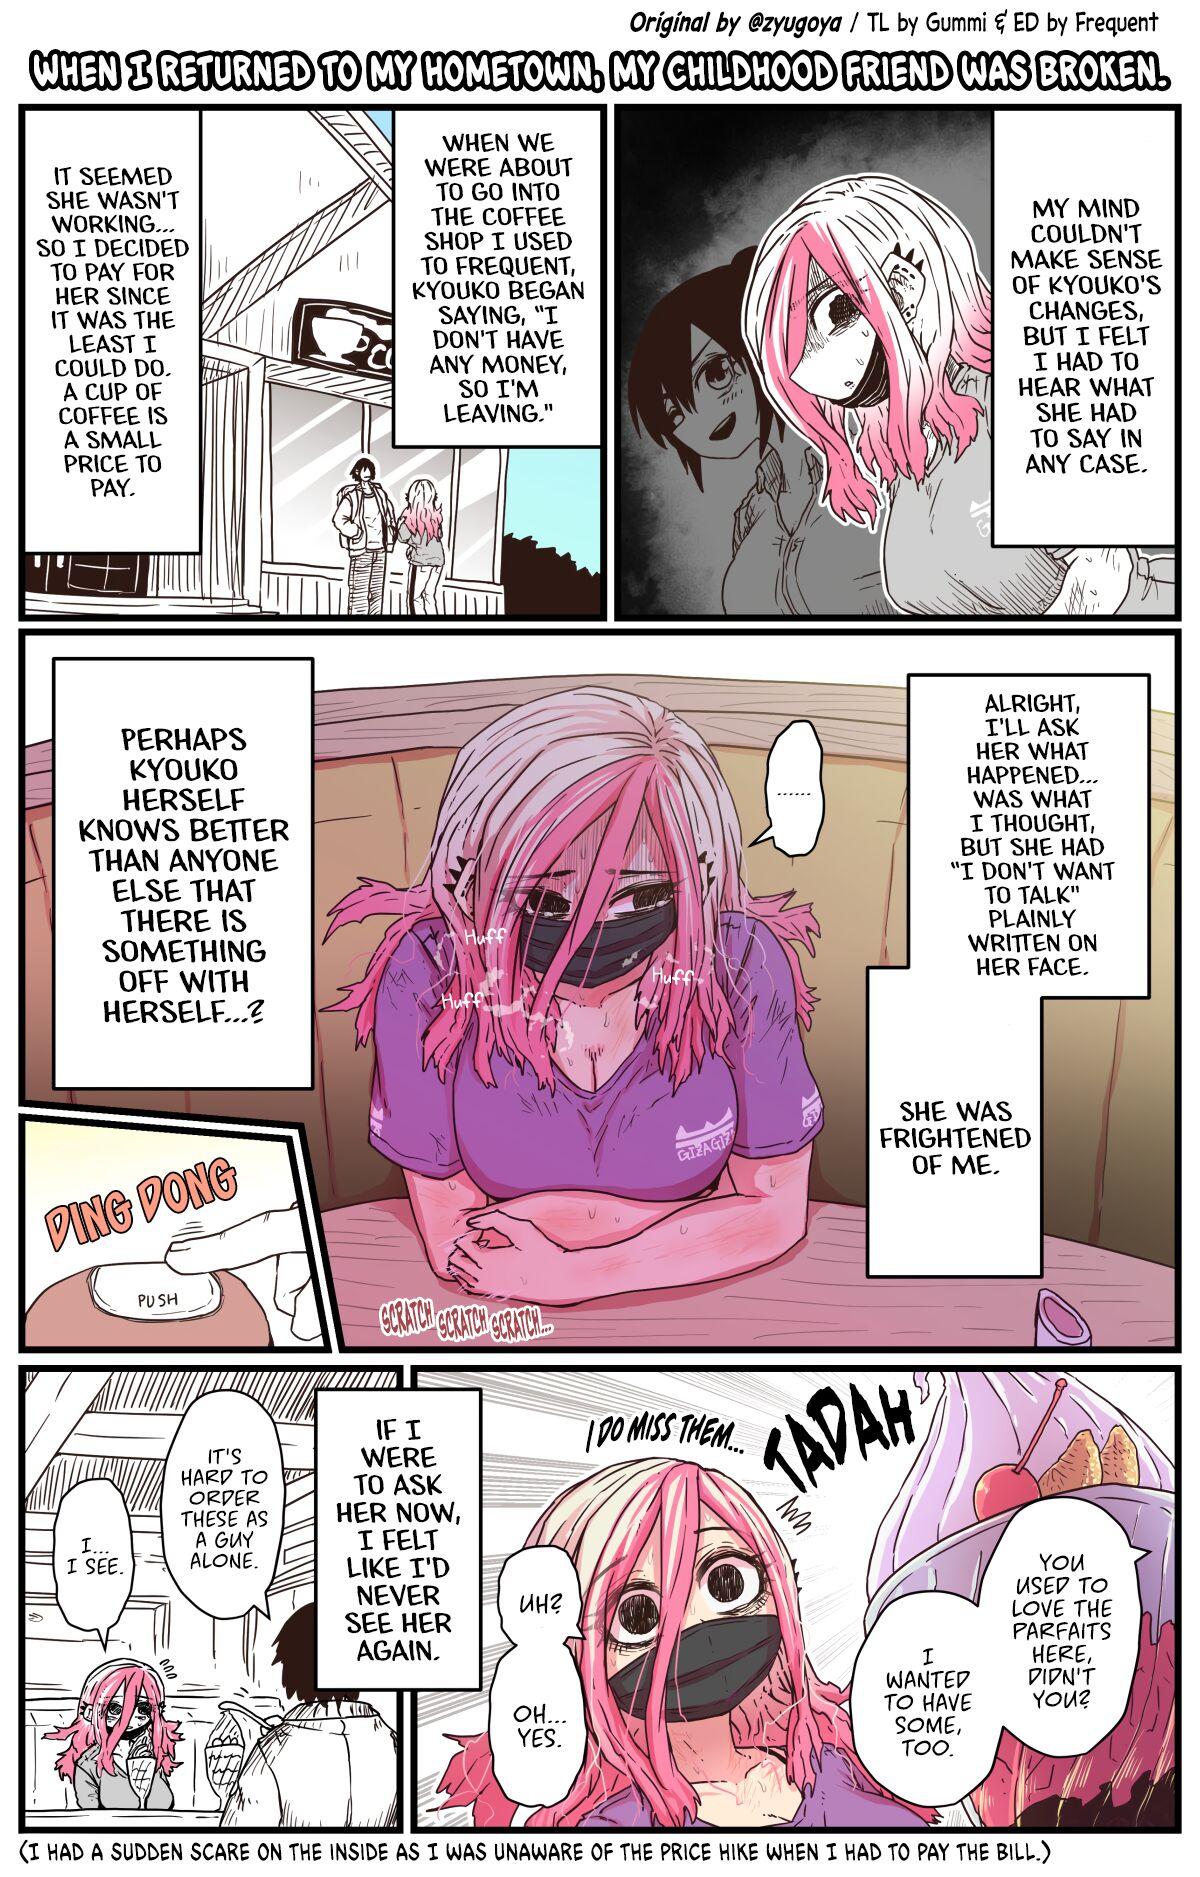 Buttfucking When I Returned to My Hometown, My Childhood Friend was Broken - Original First - Page 4